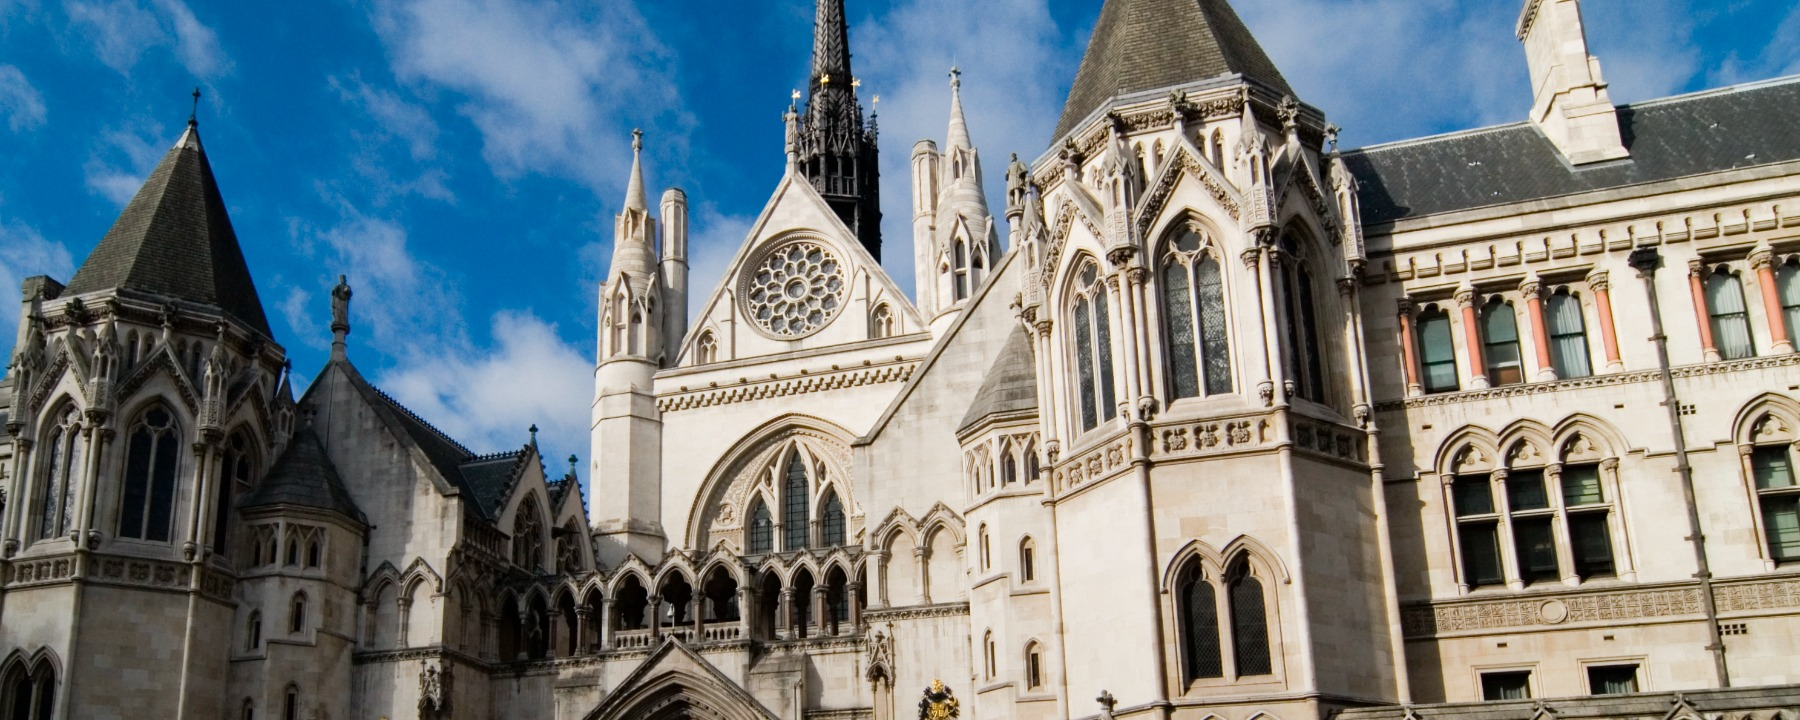 royal-court-of-justice-london